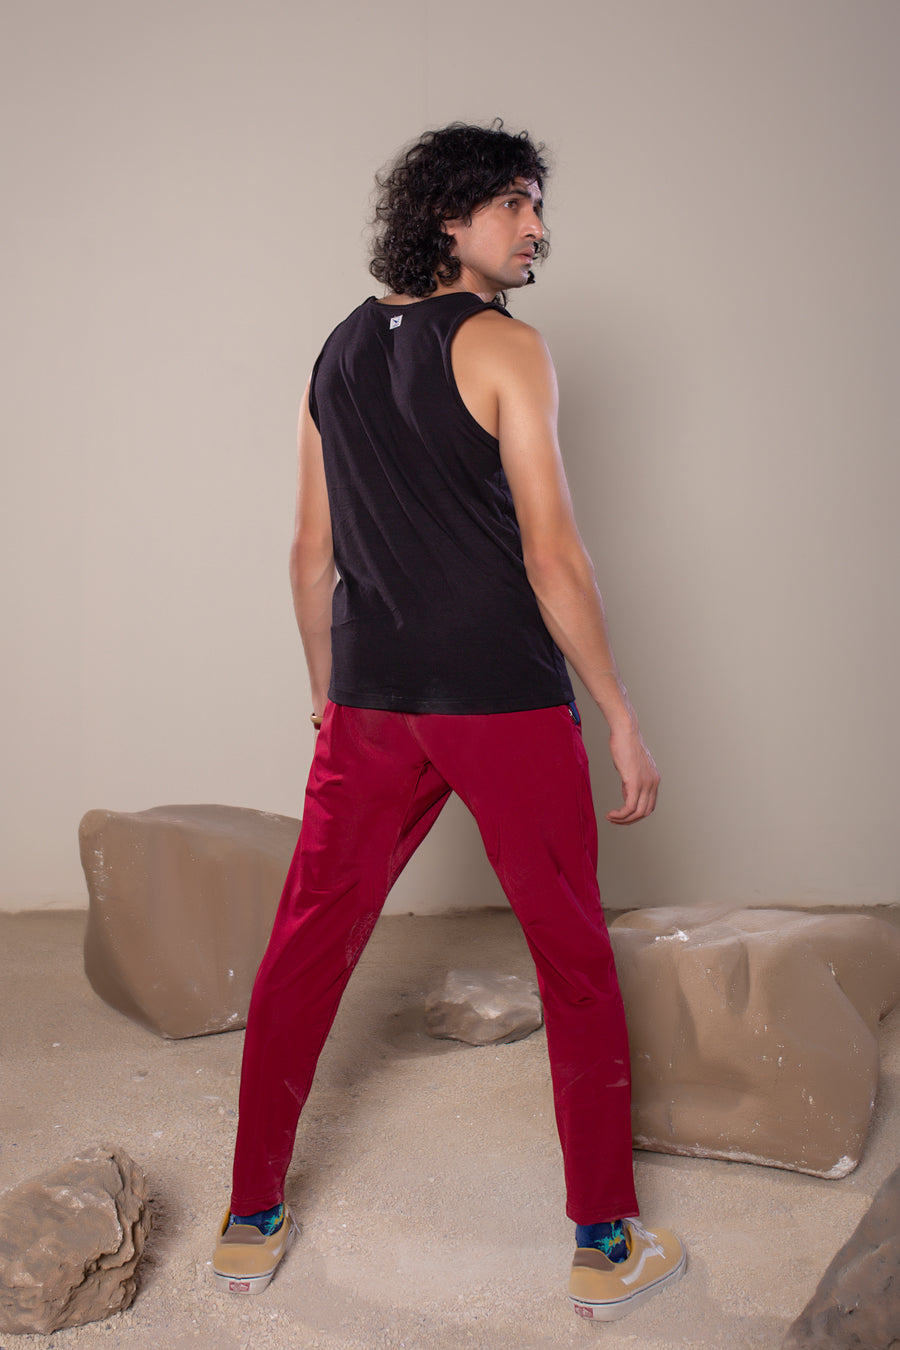 Men's Wanderlust Pant Maroon | VOLO Apparel | These pants are designed to give you wanderlust, an ultralight super durable athletic pant with a five pocket design, a 3 point gusset for all your movements and a high ankle tapered bottom. The revolutional Italian nylon is patented with UPF 50 protection and extreme breathability. The one pant to go everywhere and do everything!